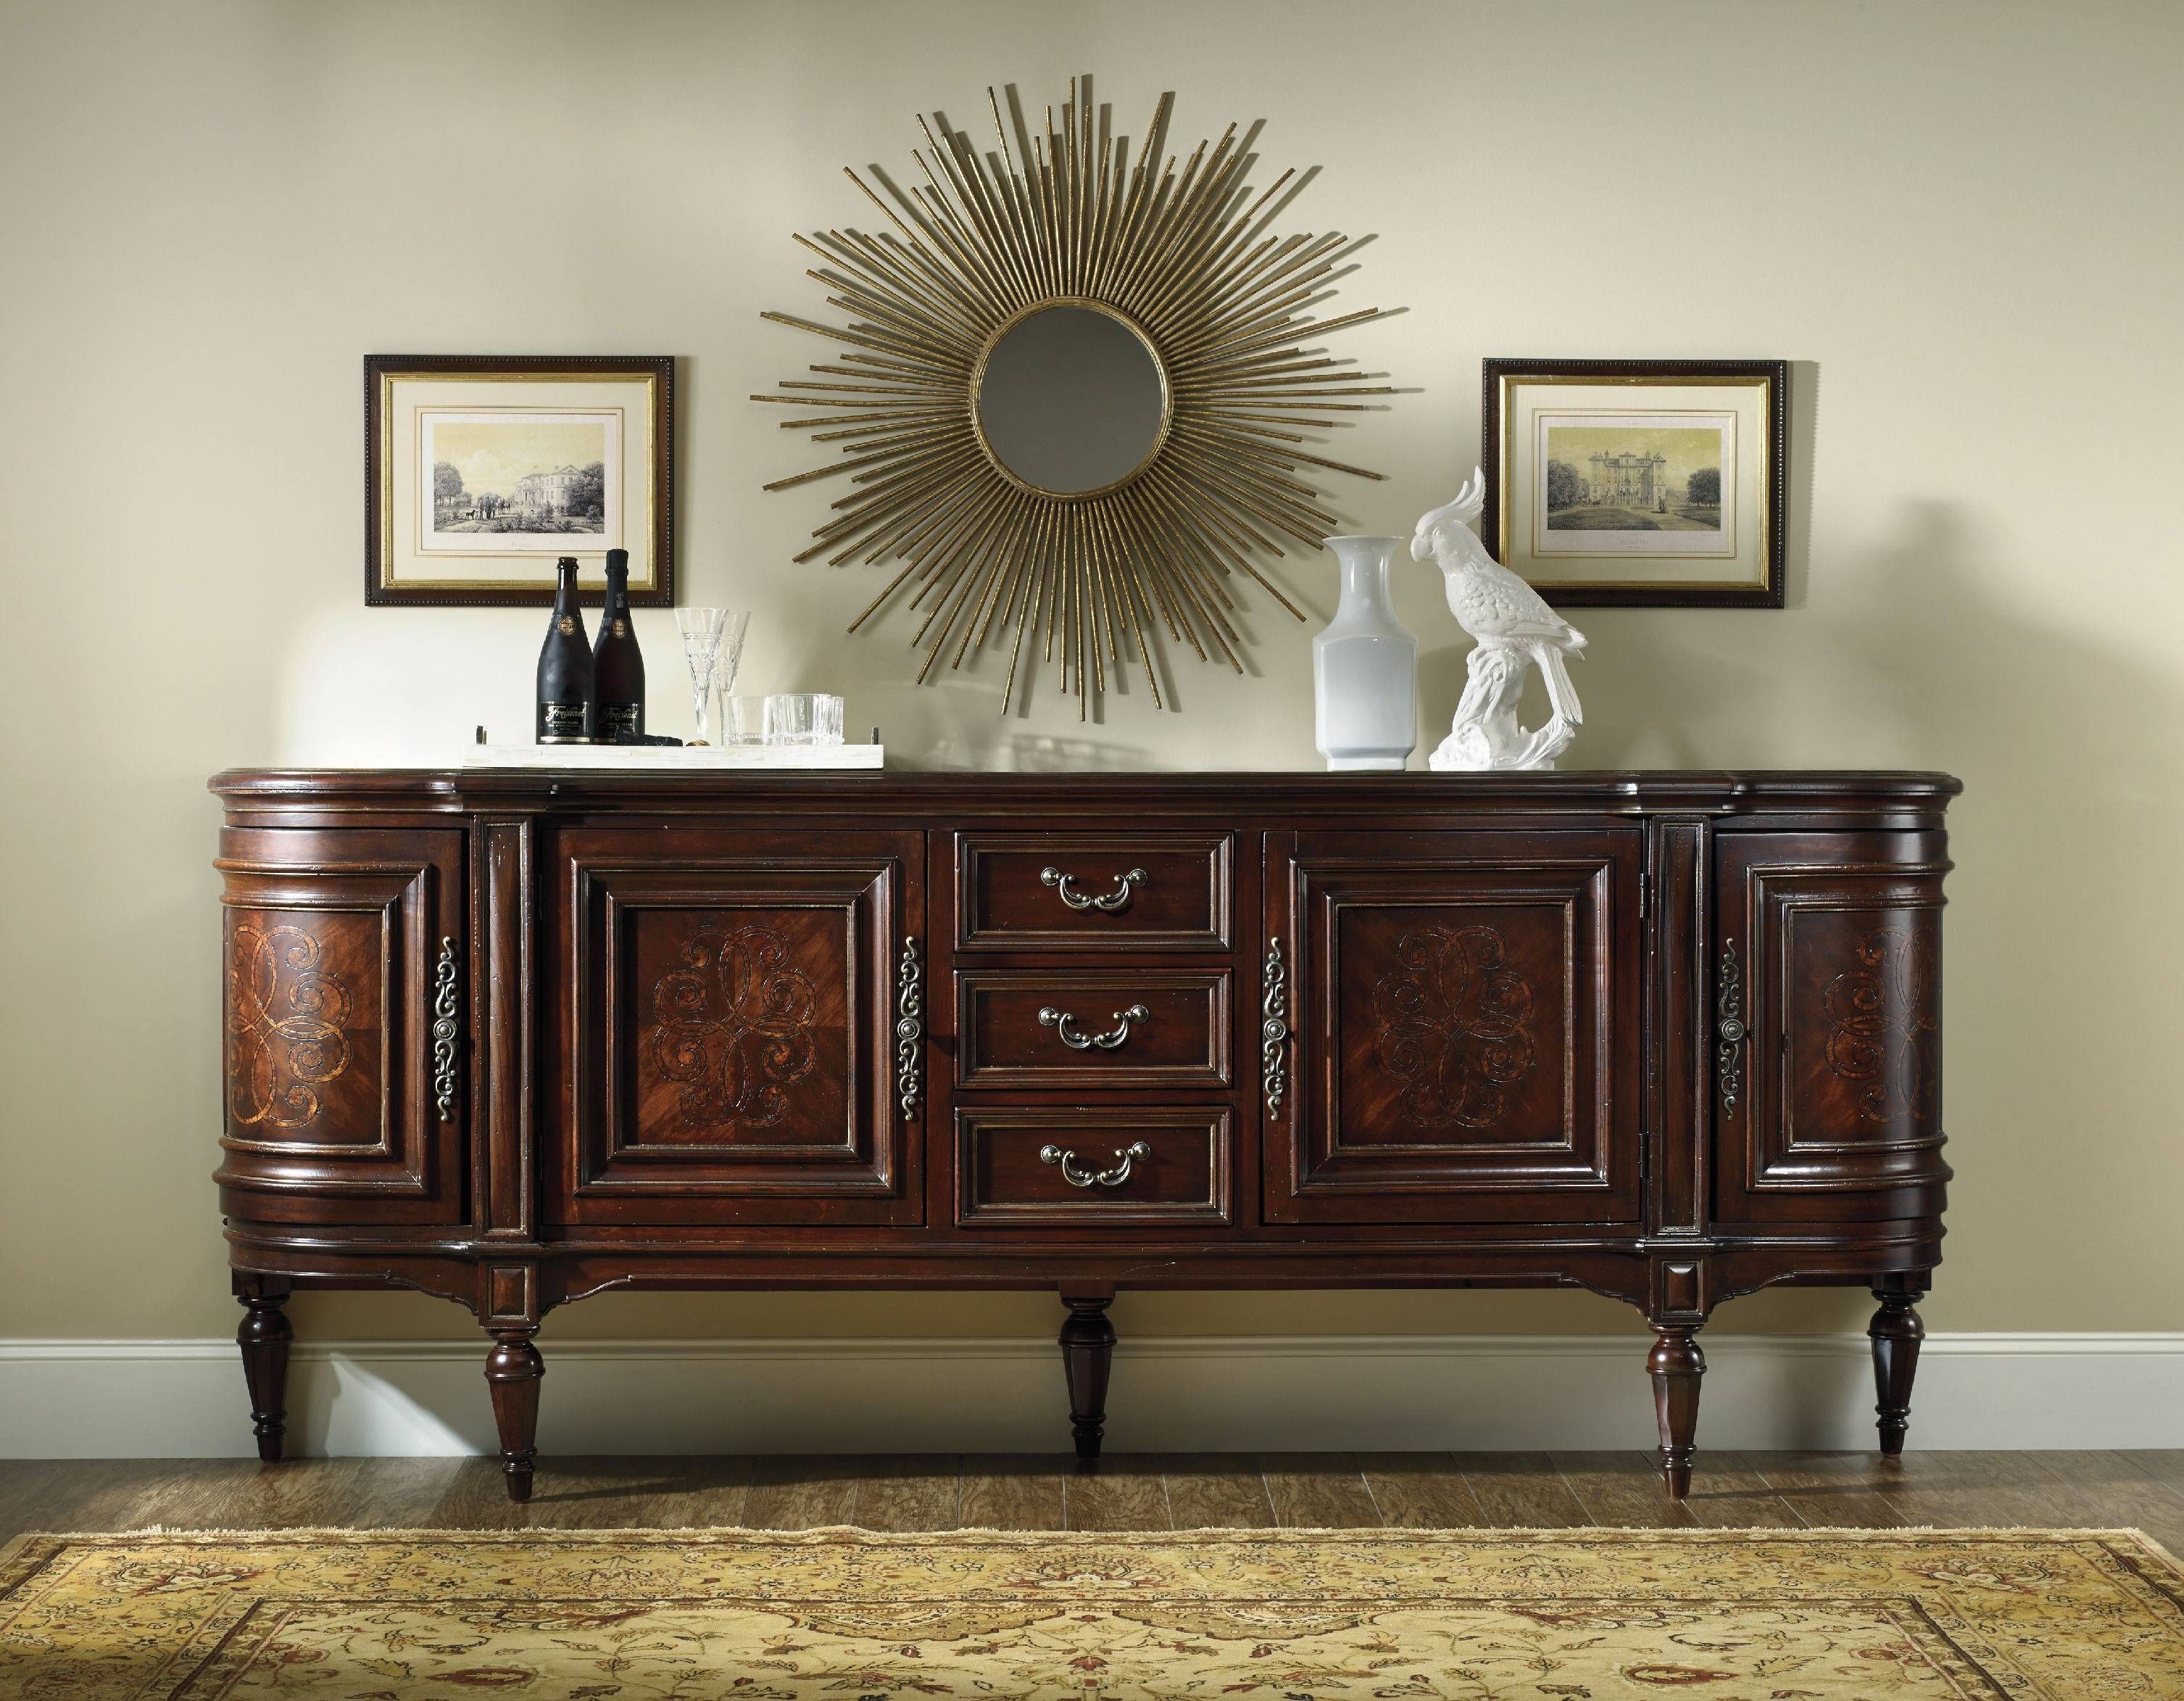 Beautiful Sideboards And Servers – Bjdgjy Regarding Most Up To Date Sideboards And Servers (View 5 of 15)